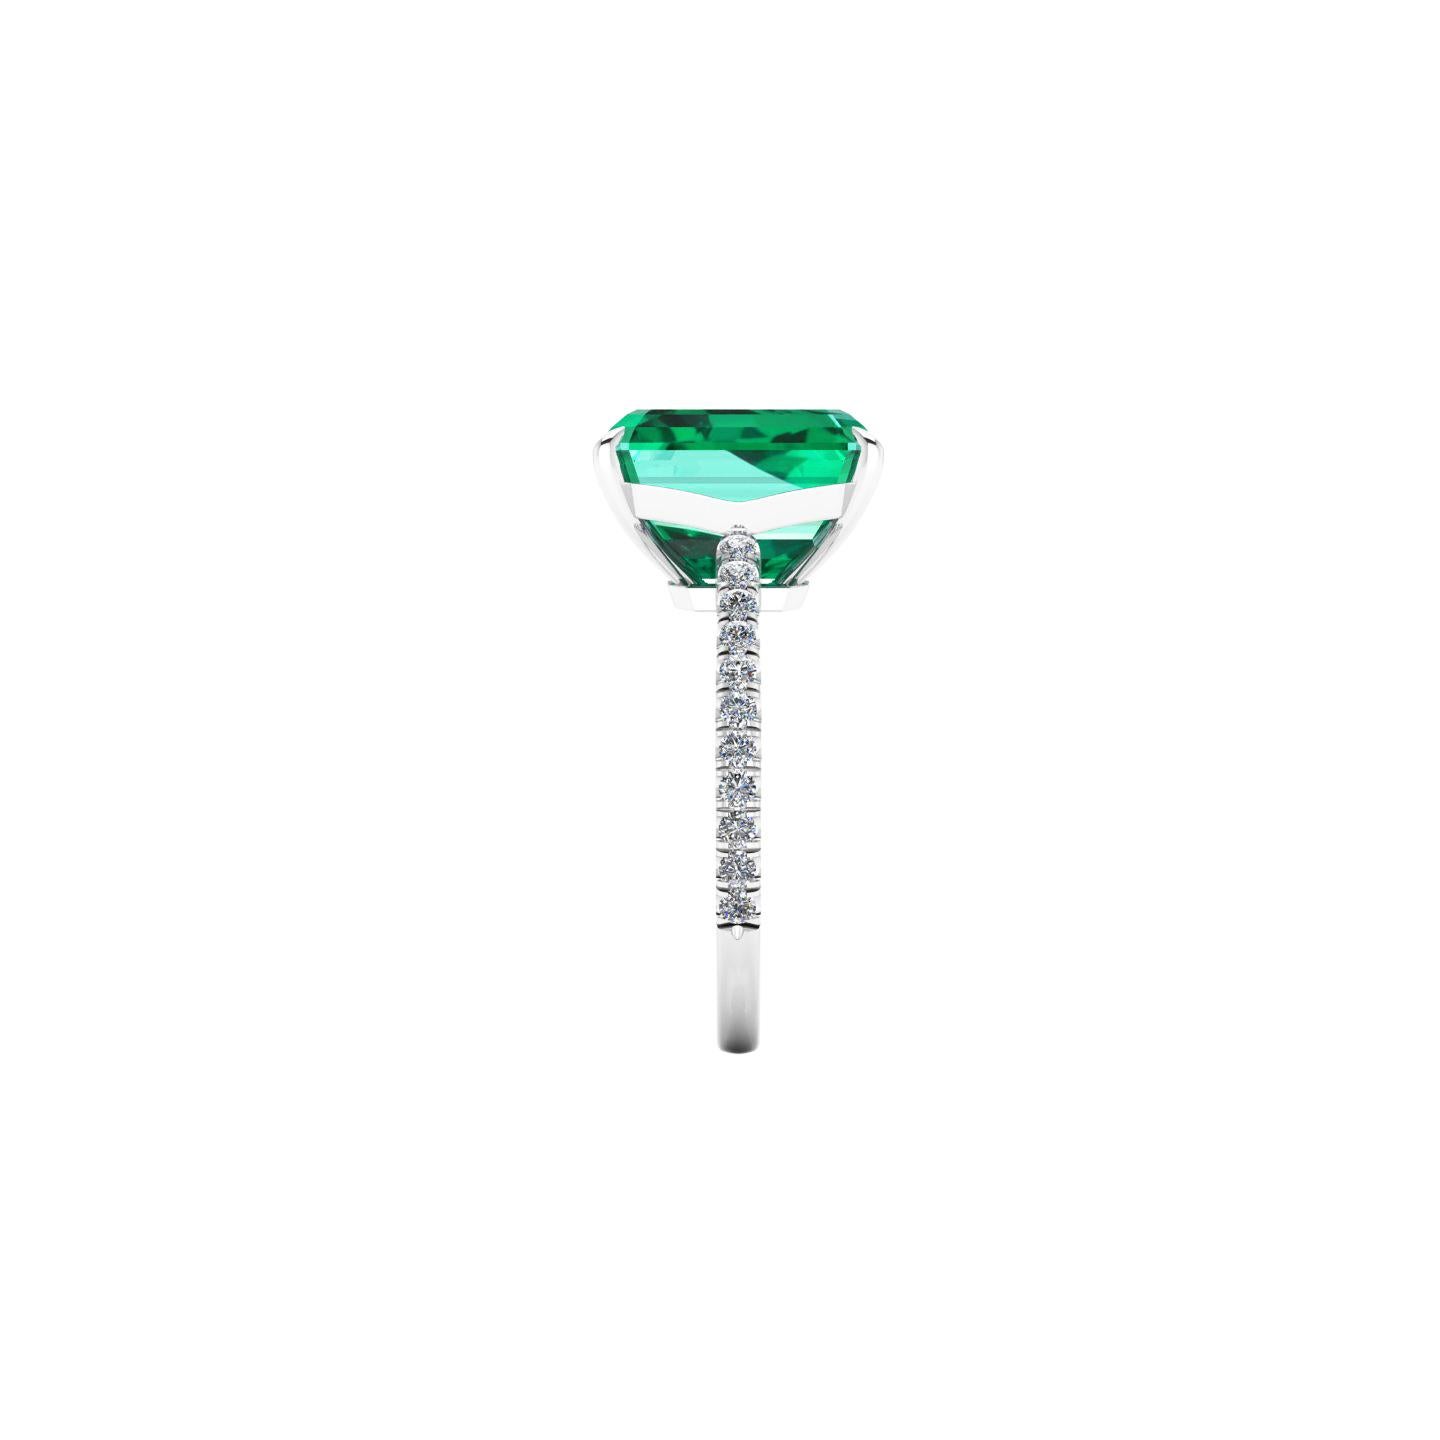 FERRUCCI GIA Certified 4.53 carat Emerald, very high quality color and transparency embellished by a pave' of bright diamonds of approximately  total carat weight of 0.32 carat, set in a hand crafted Platinum 950 ring, manufactured with the best